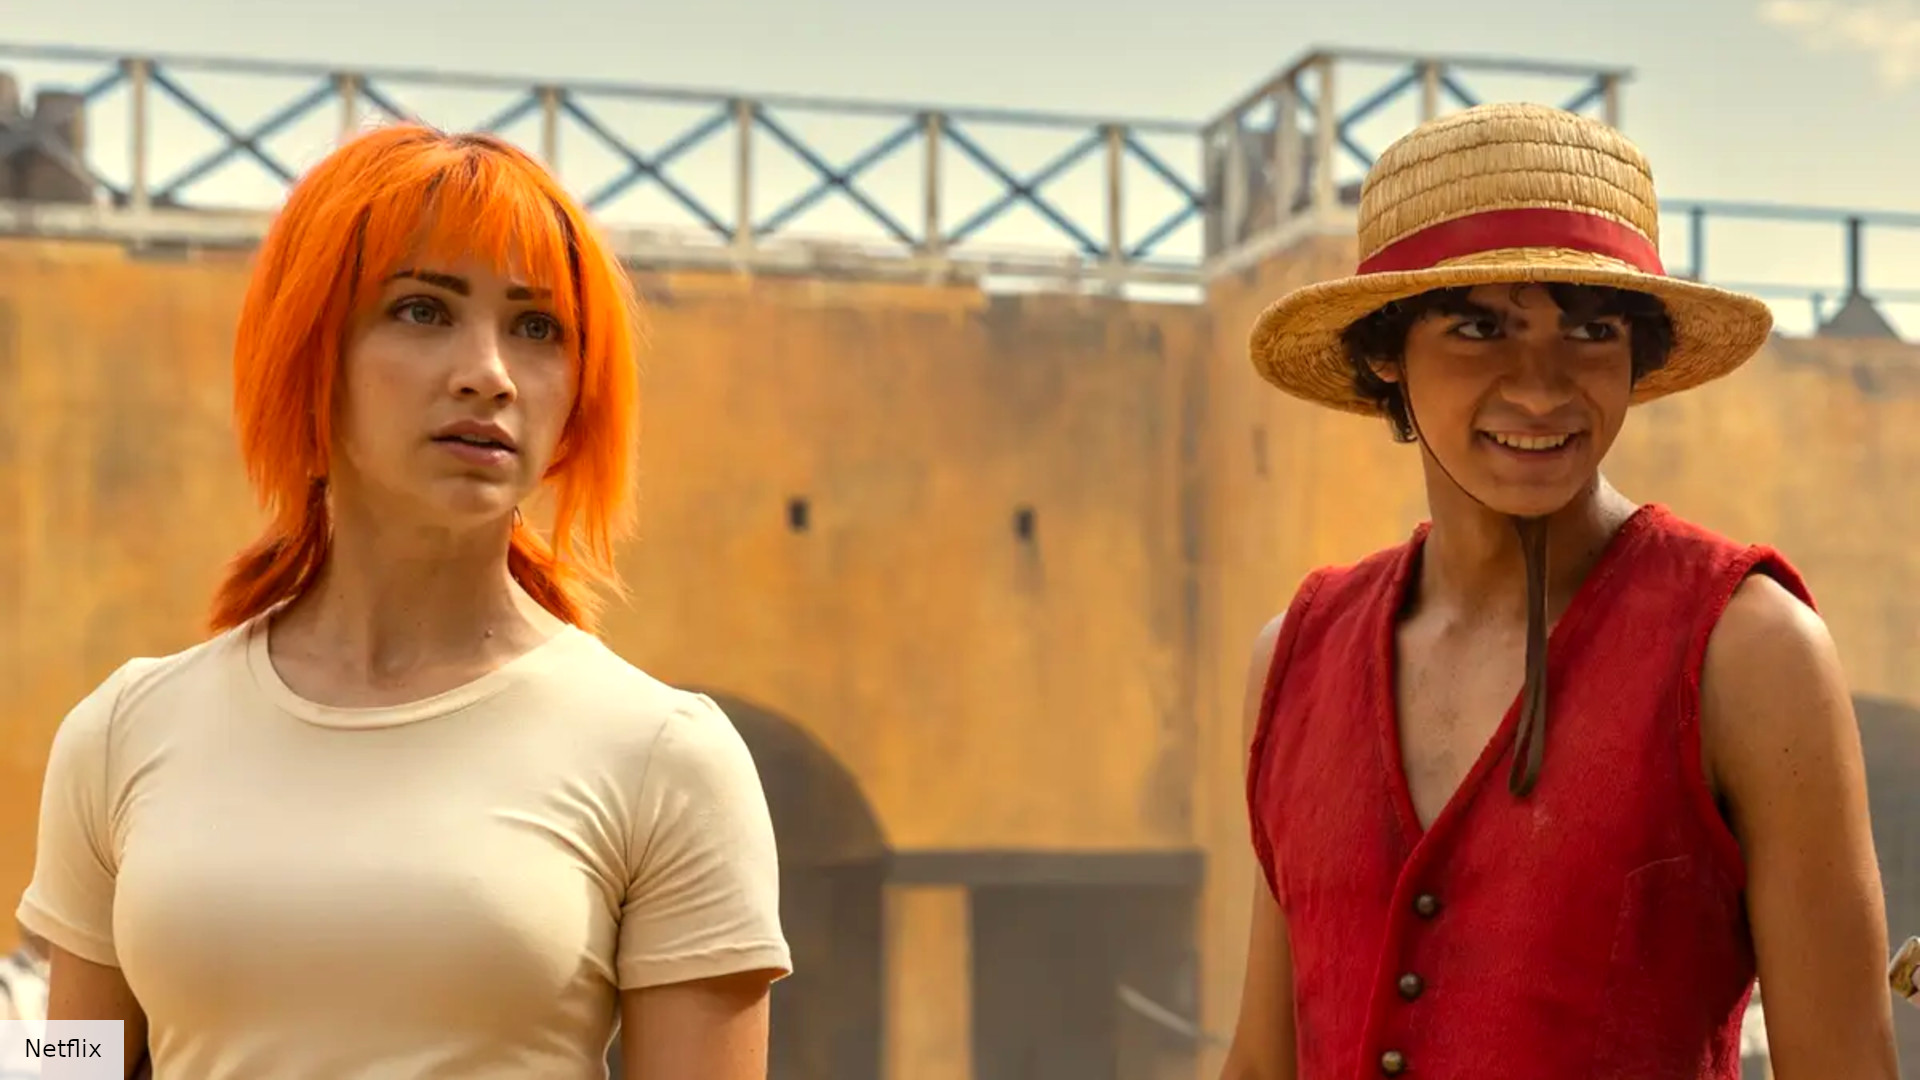 One Piece liveaction has taken over the Netflix charts, remarkably